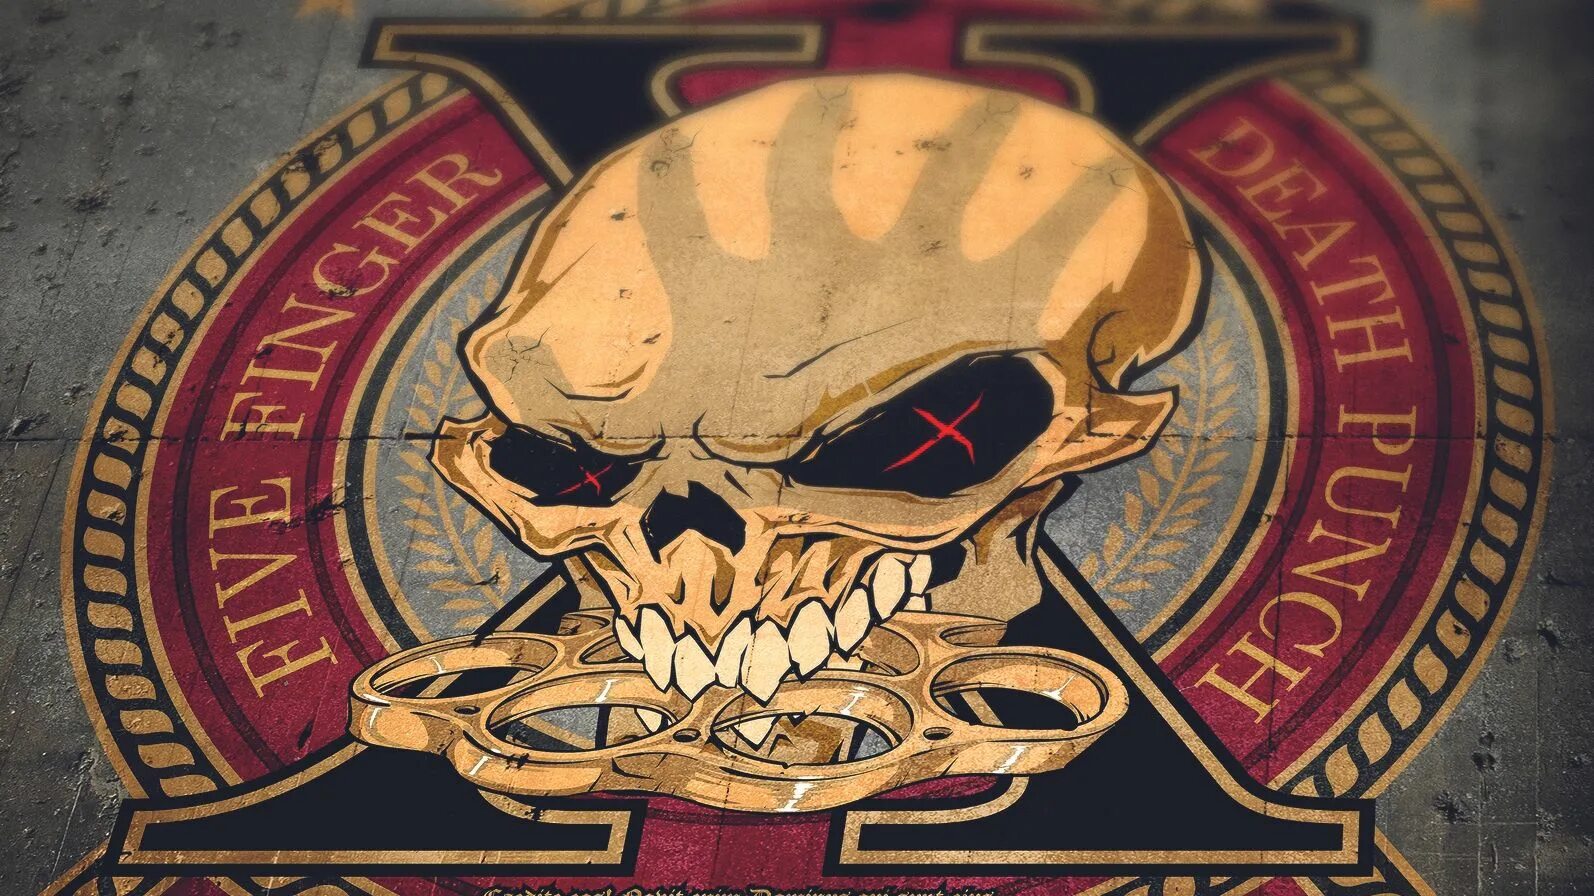 Five finger Death Punch 2017 a decade of Destruction. FFDP обложки. A decade of Destruction, Volume 2 Five finger Death Punch. Пластинки Five finger Death Punch.